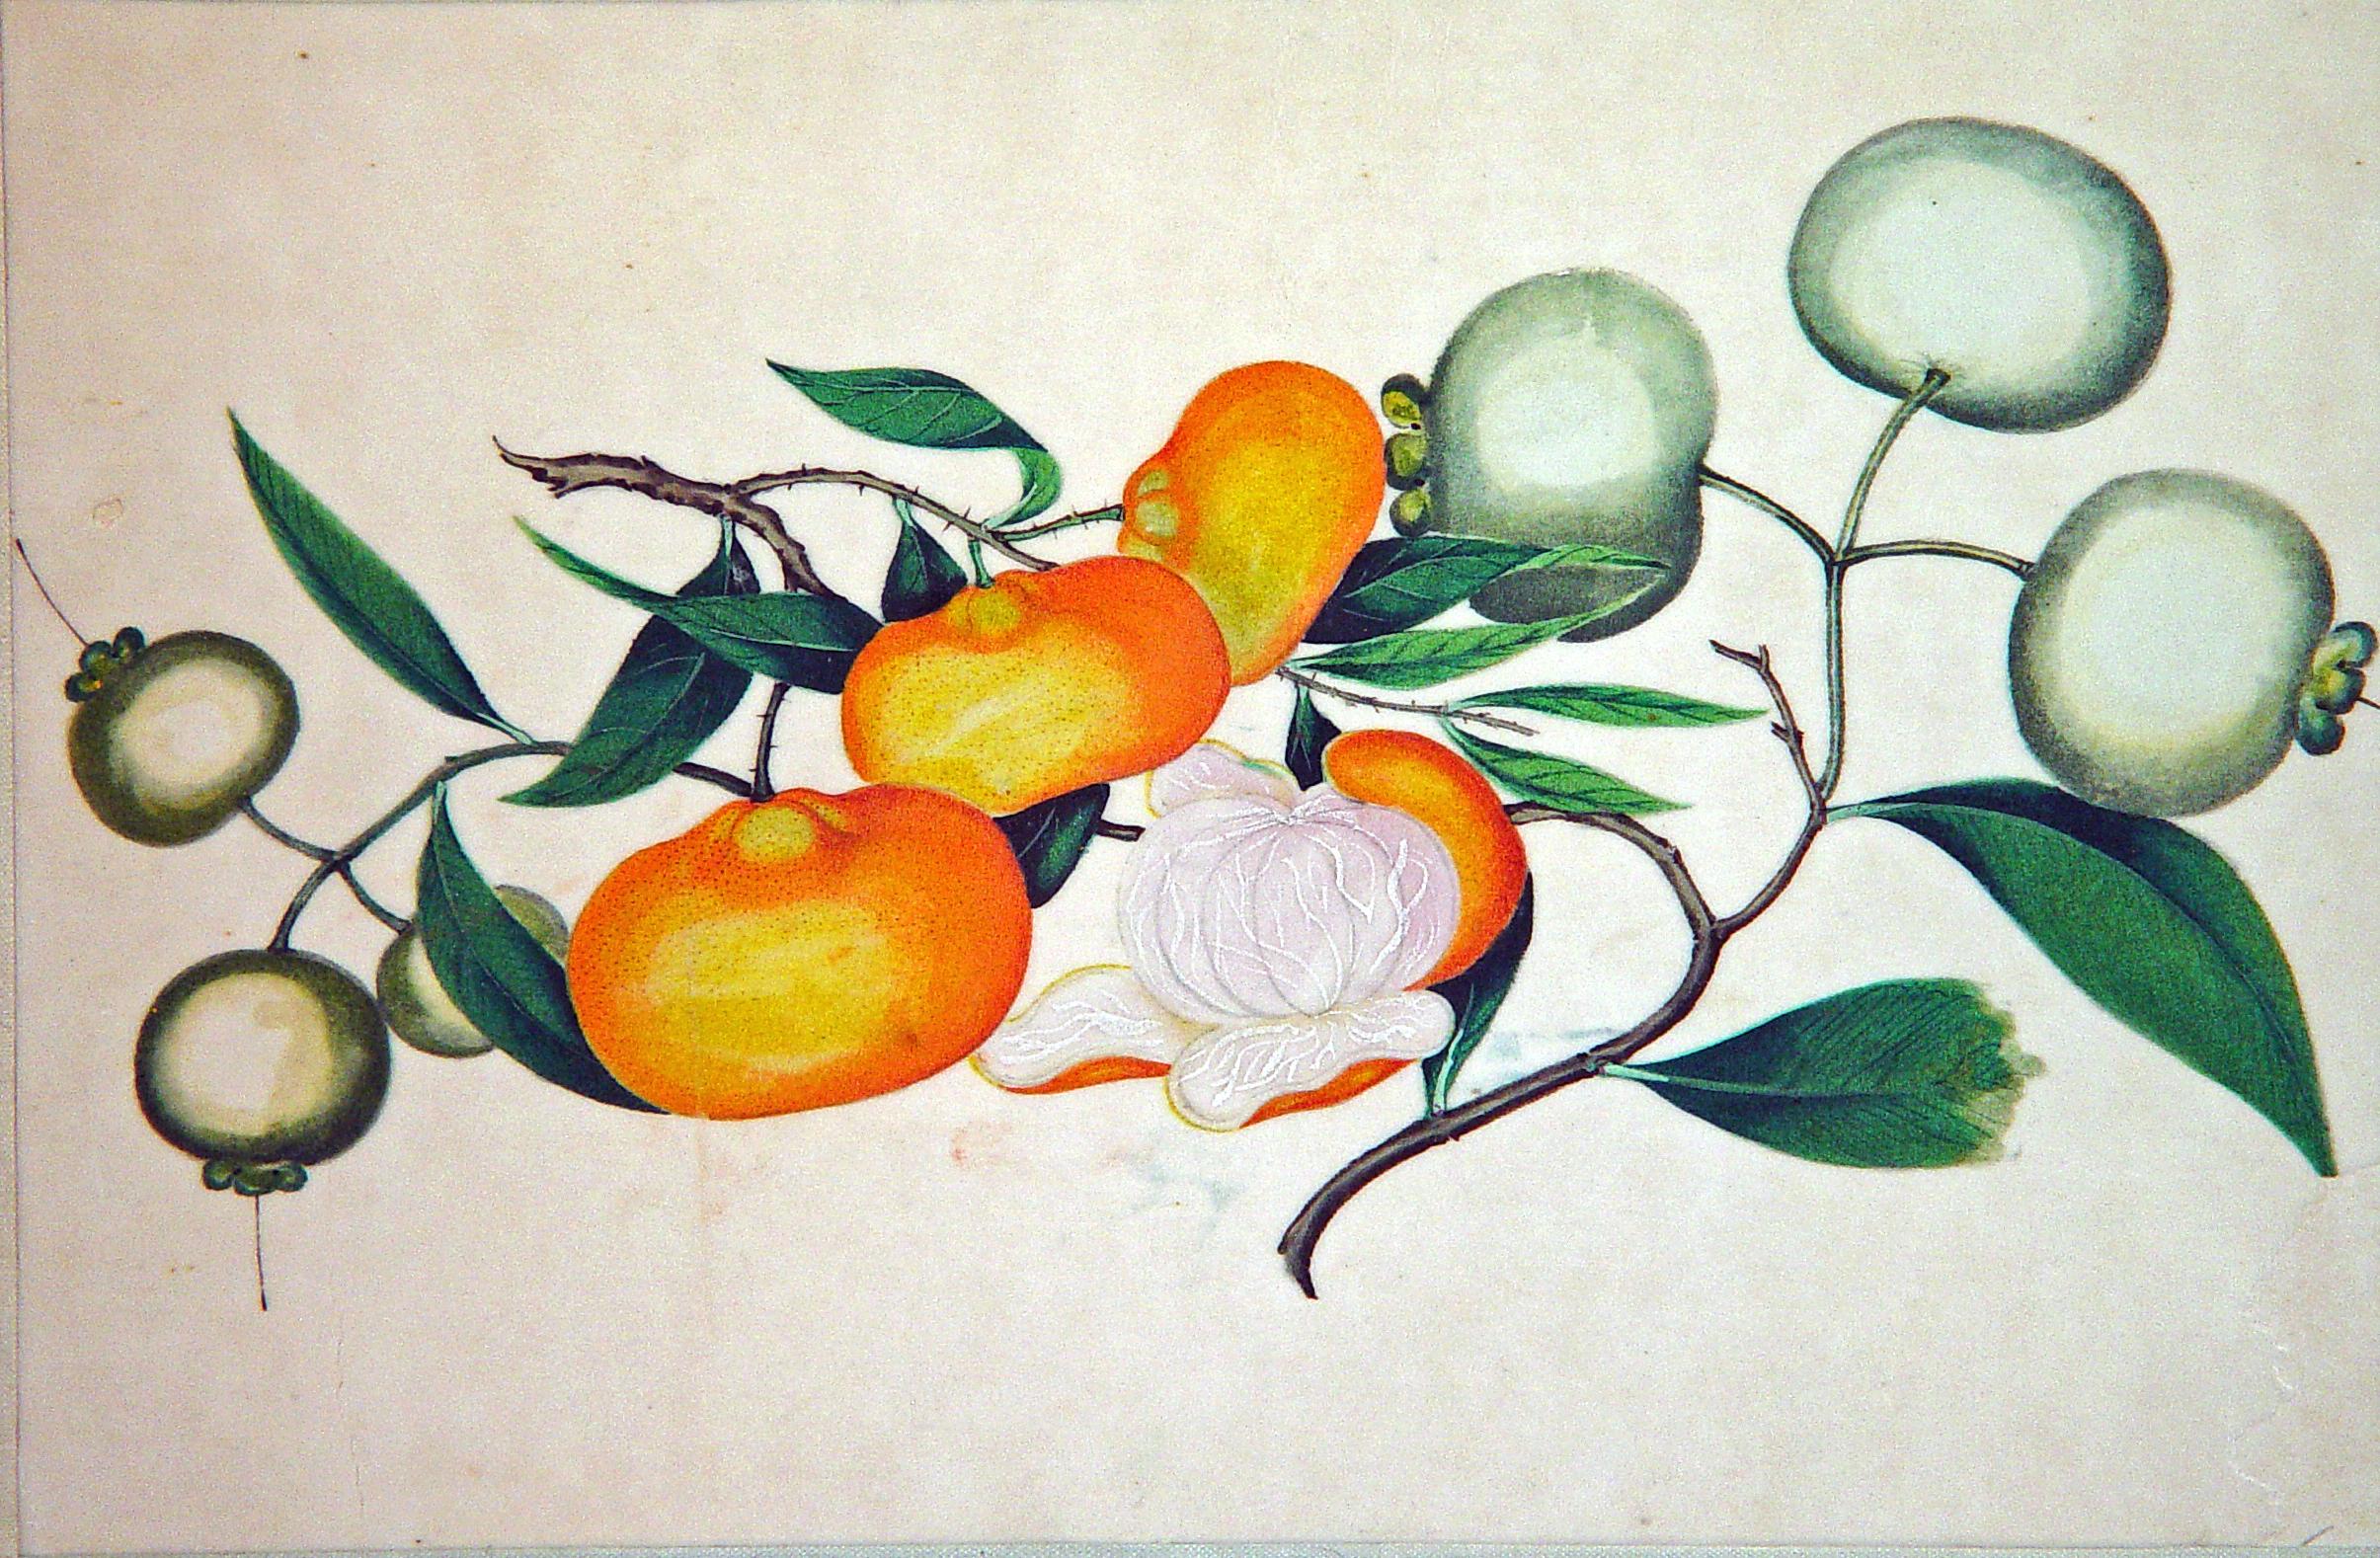 Chinese Export China Trade Watercolors of Exotic Fruit on Pith Paper, Mid-19th Century For Sale